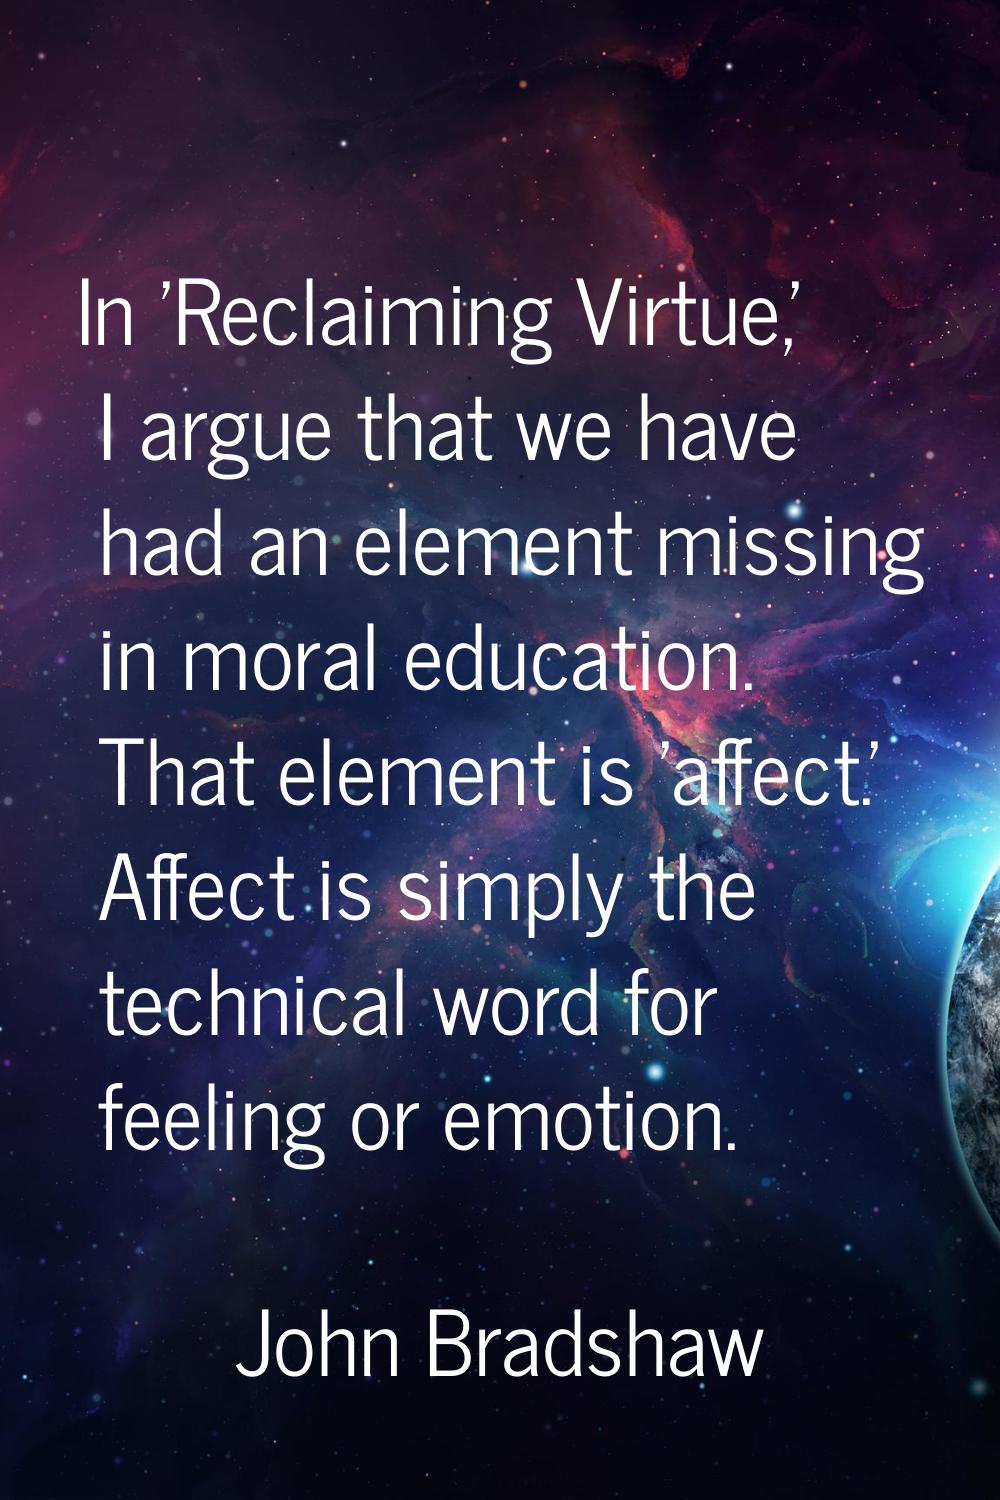 In 'Reclaiming Virtue,' I argue that we have had an element missing in moral education. That elemen